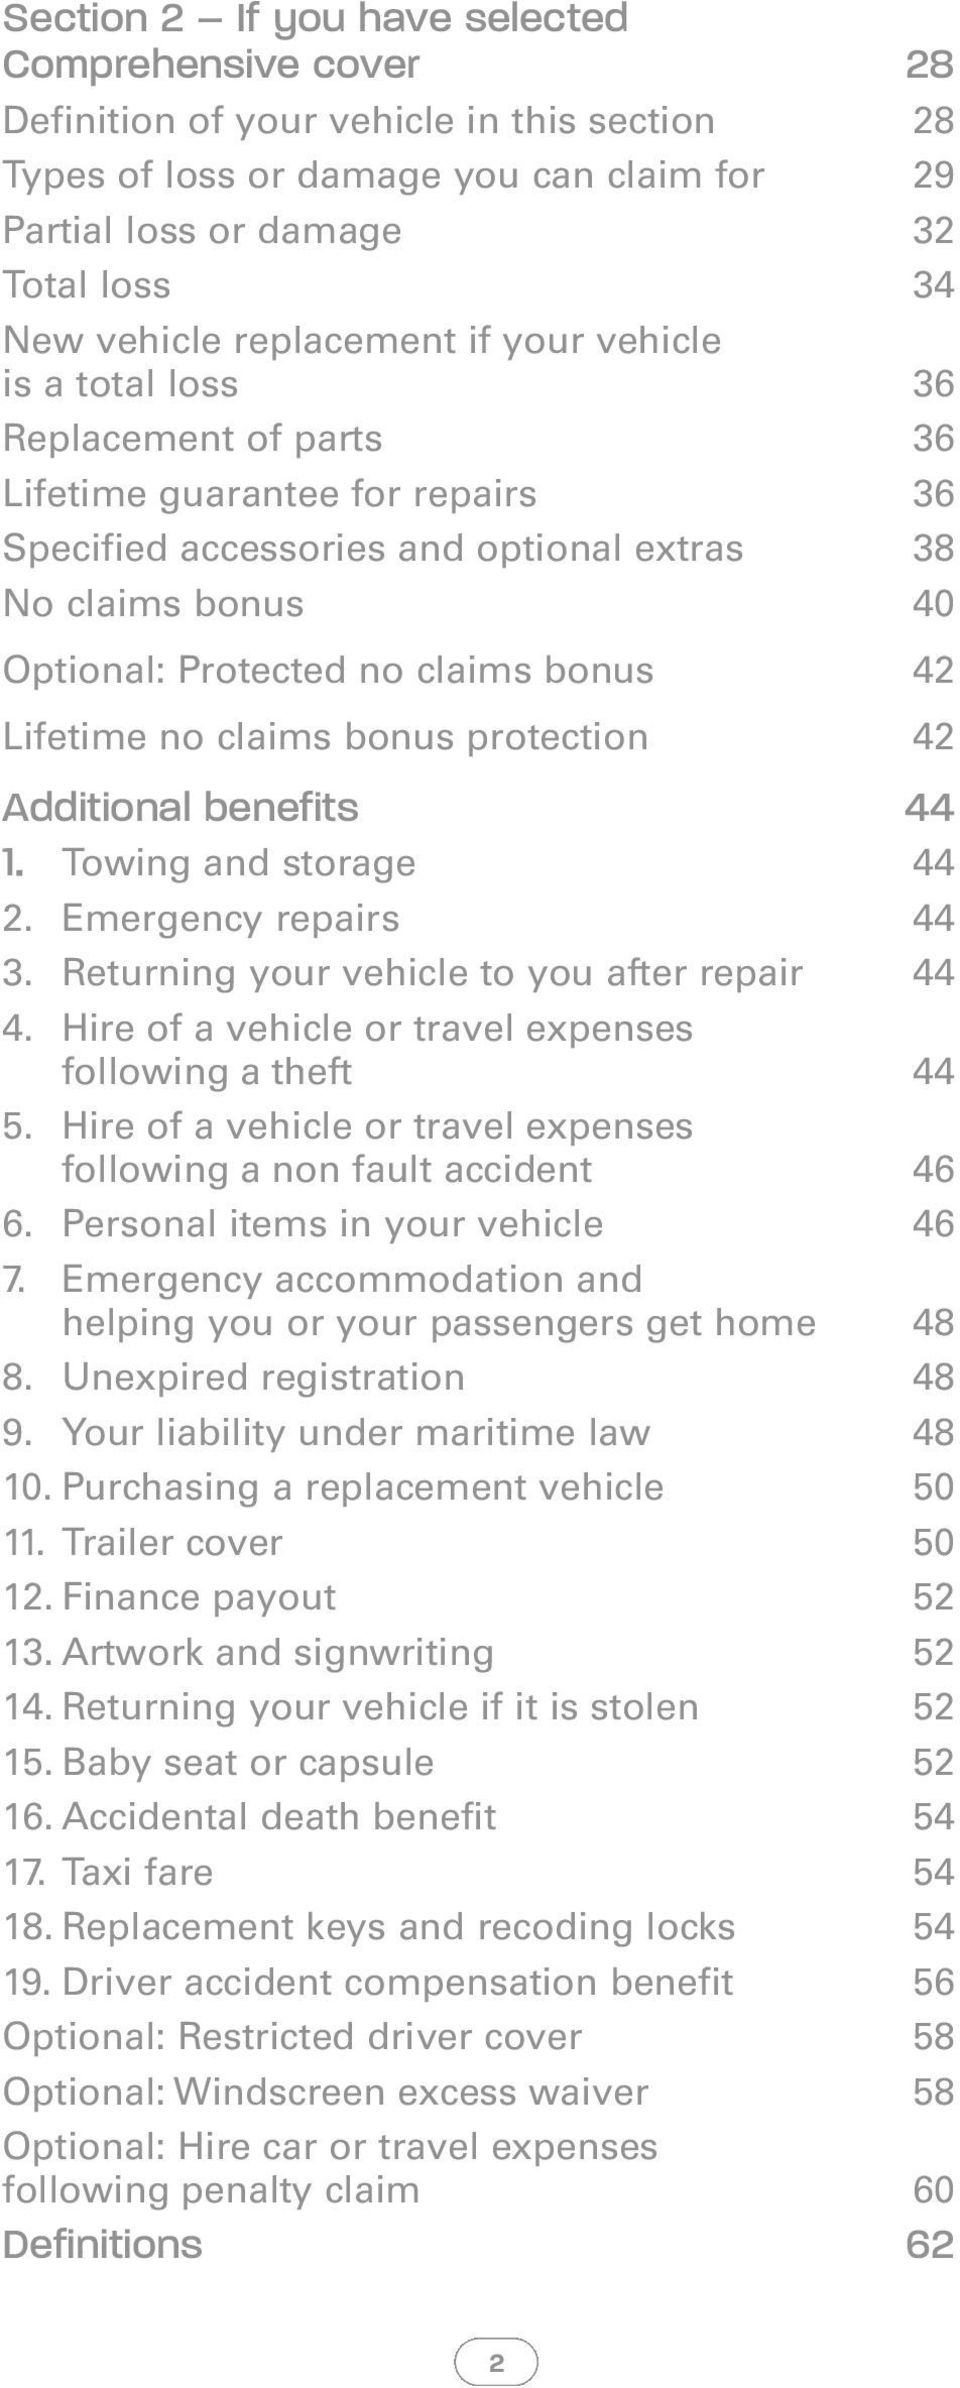 bonus 42 Lifetime no claims bonus protection 42 Additional benefits 44 1. Towing and storage 44 2. Emergency repairs 44 3. Returning your vehicle to you after repair 44 4.